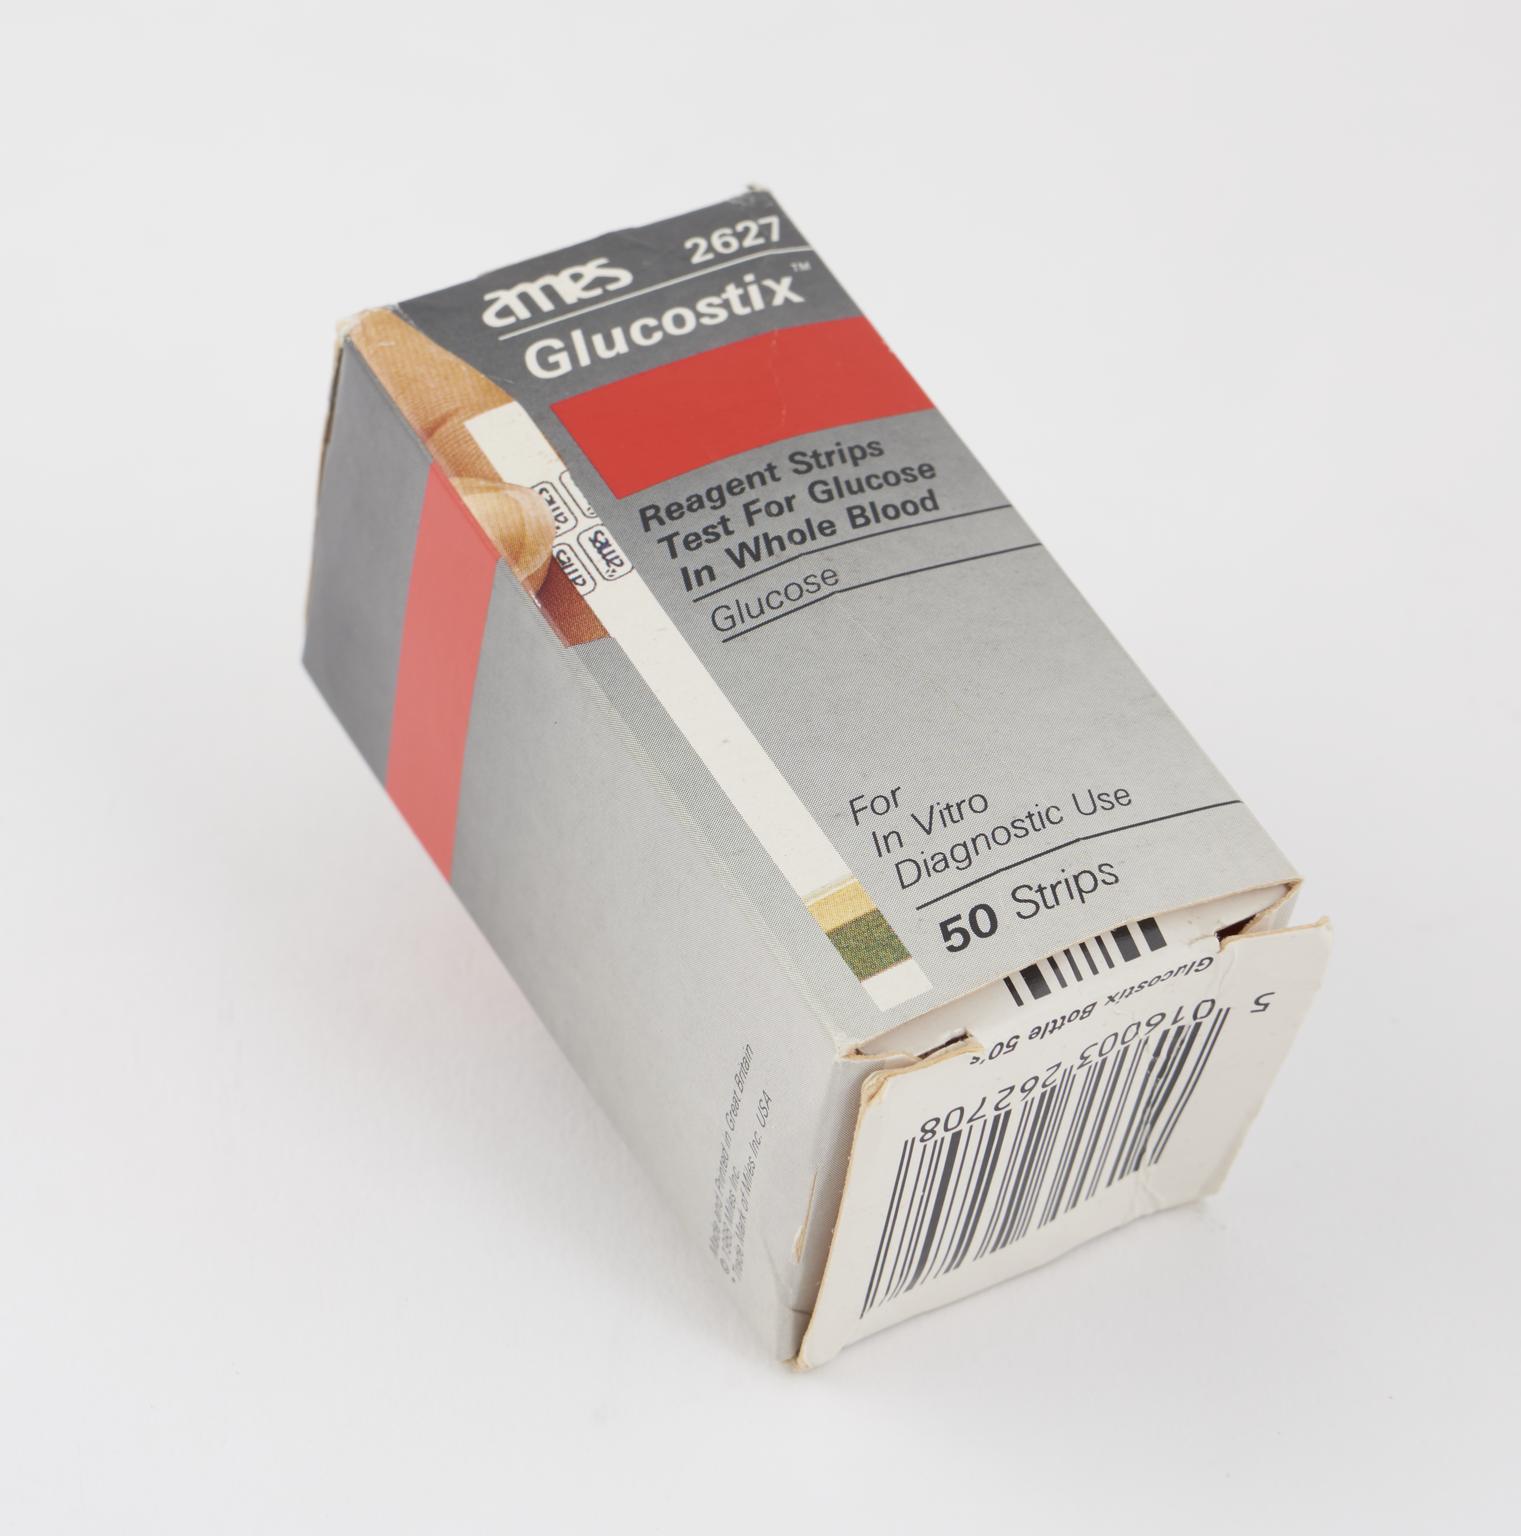 Box of the test strips